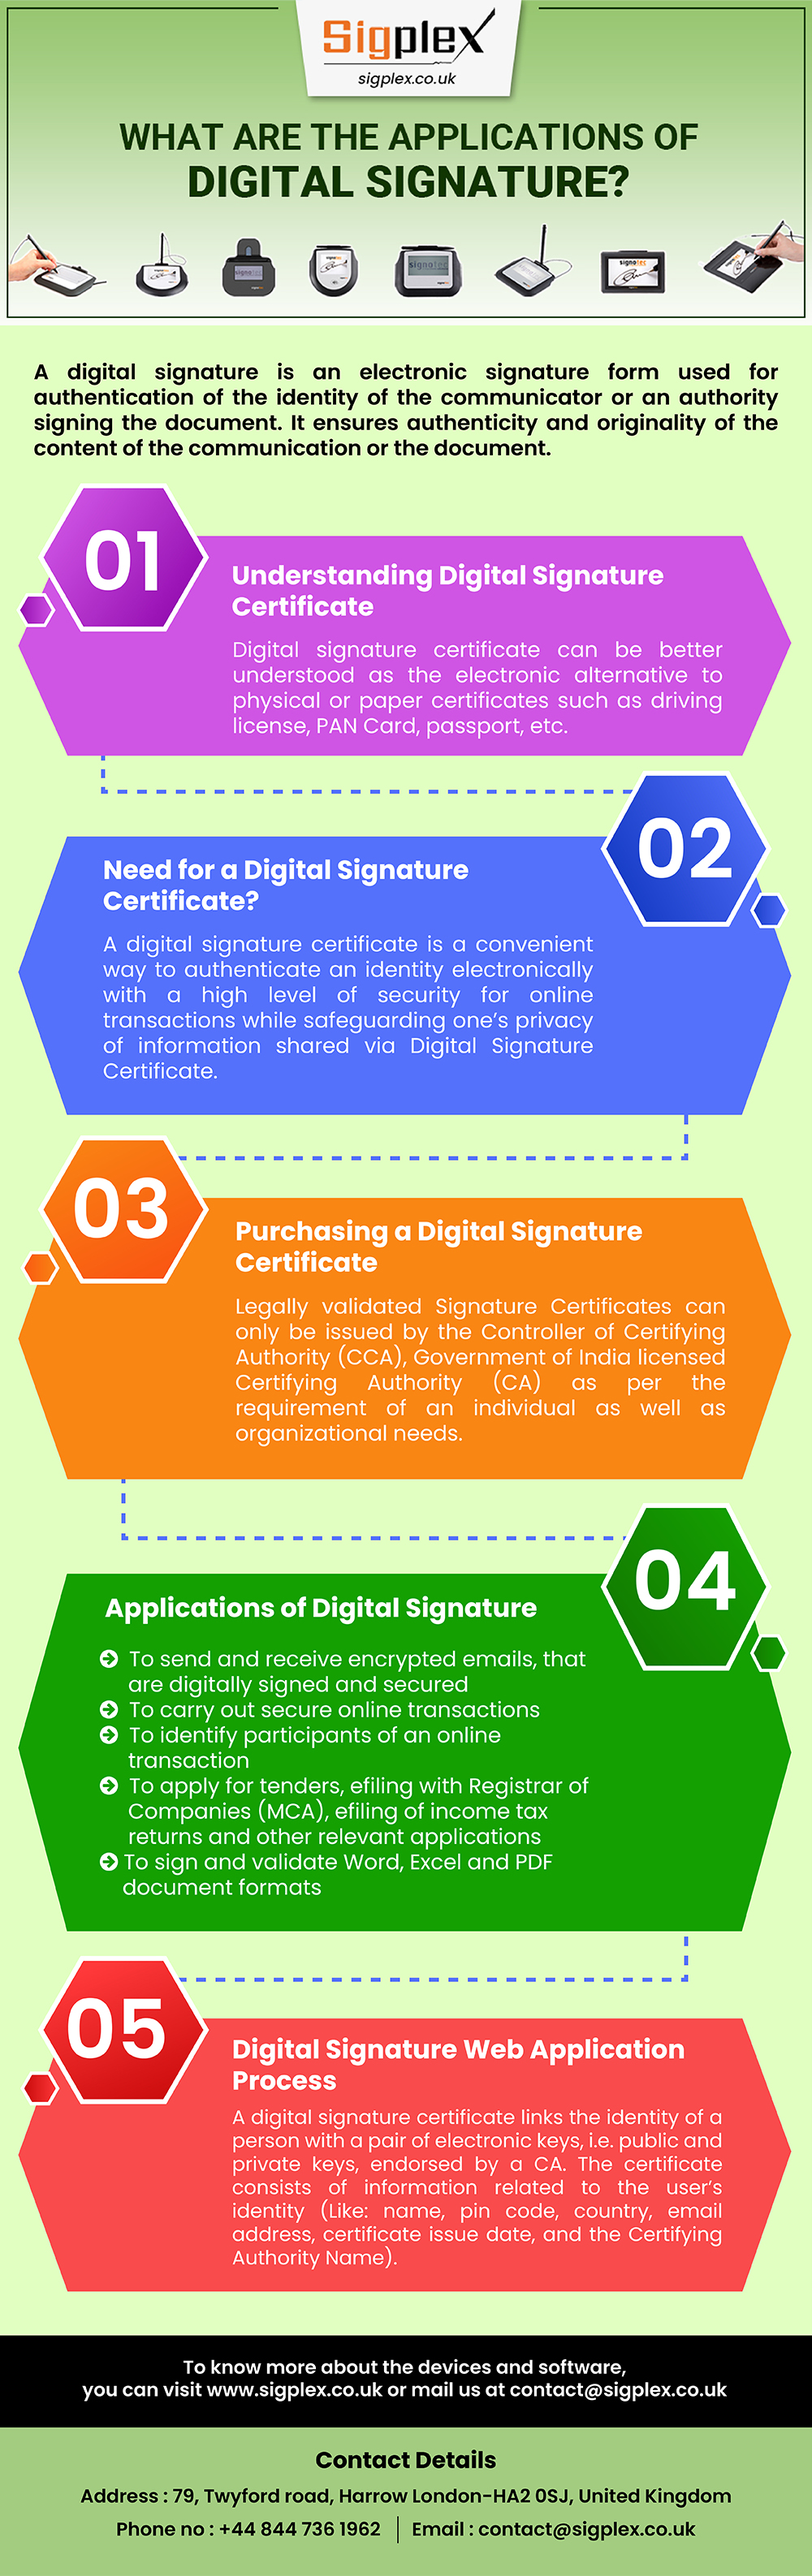 What are the Applications of Digital Signature